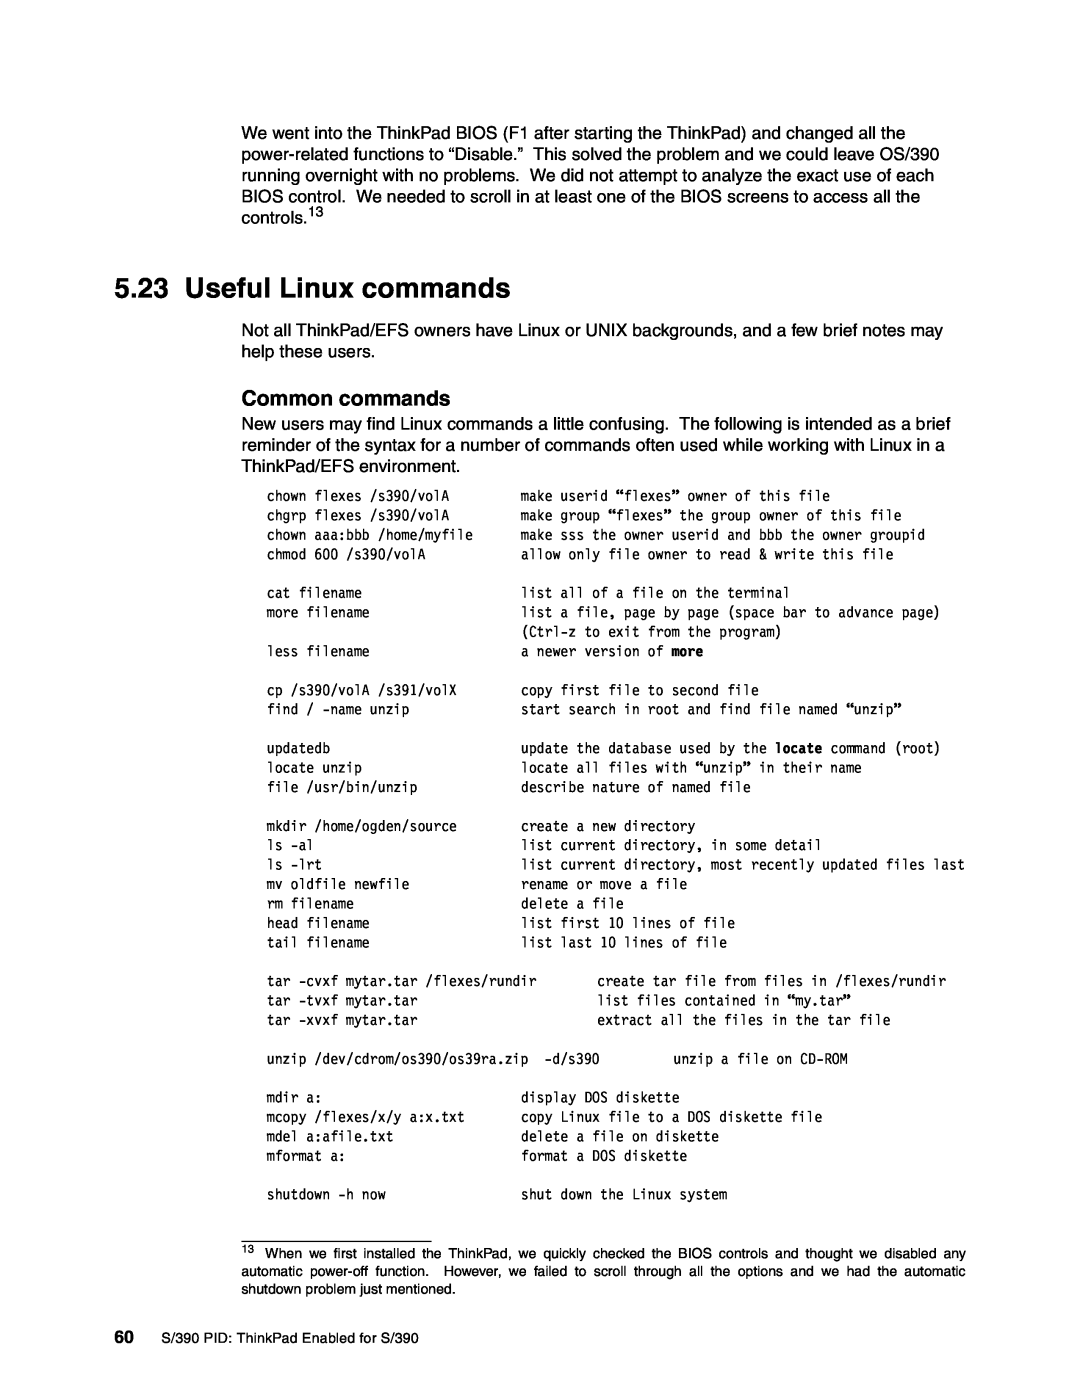 IBM s/390 manual Useful Linux commands, Common commands 